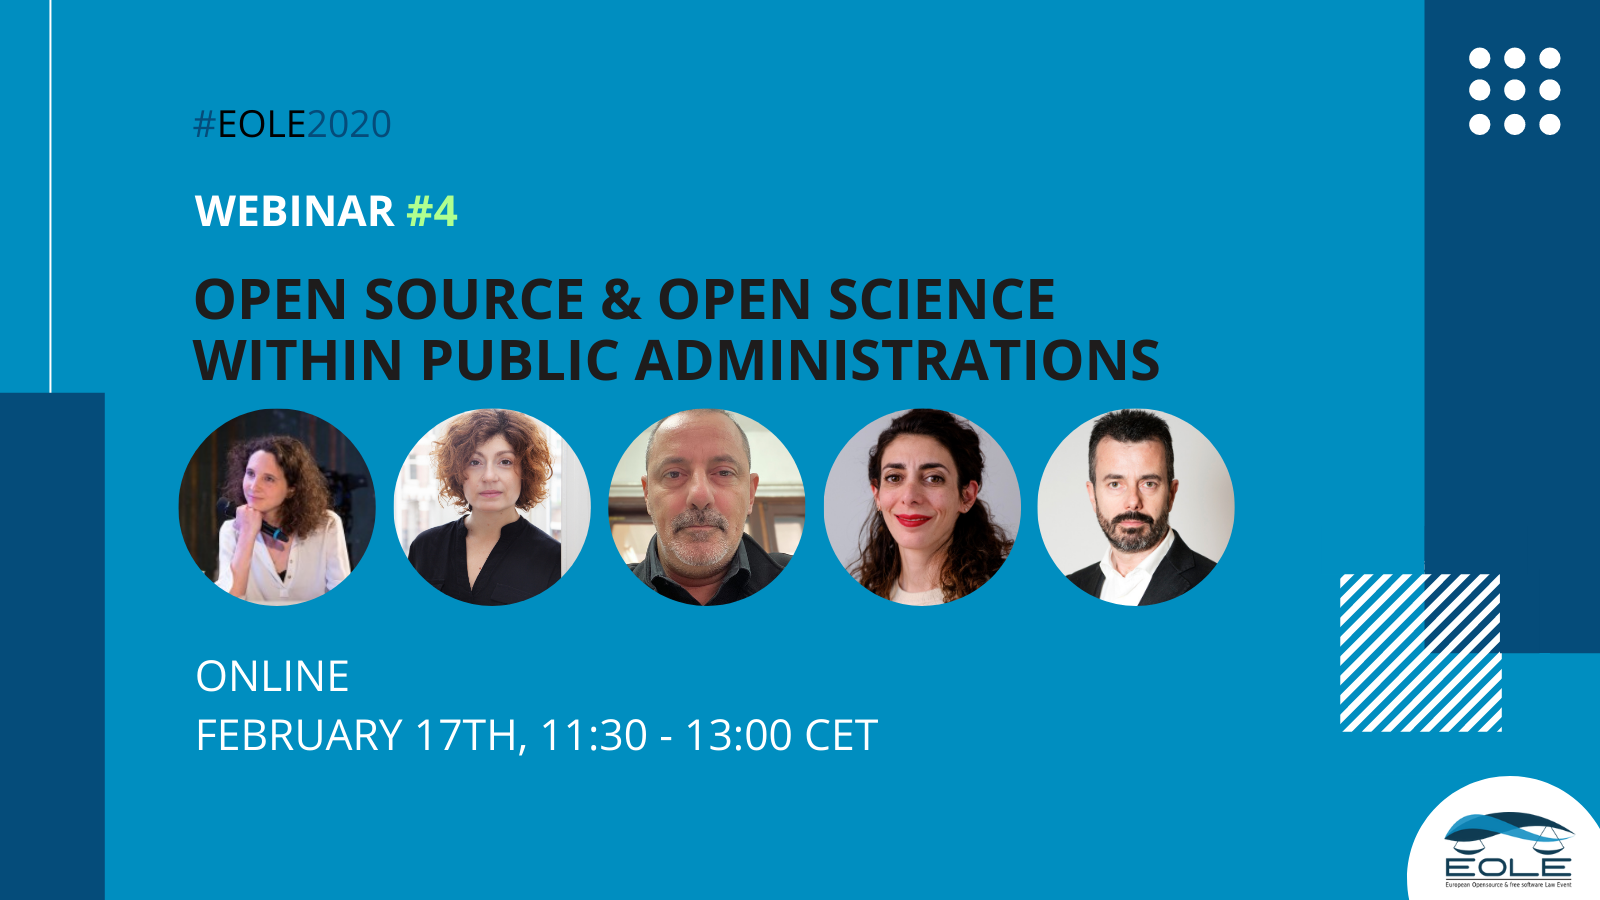 EOLE fourth webinar on open source and open science within public administrations